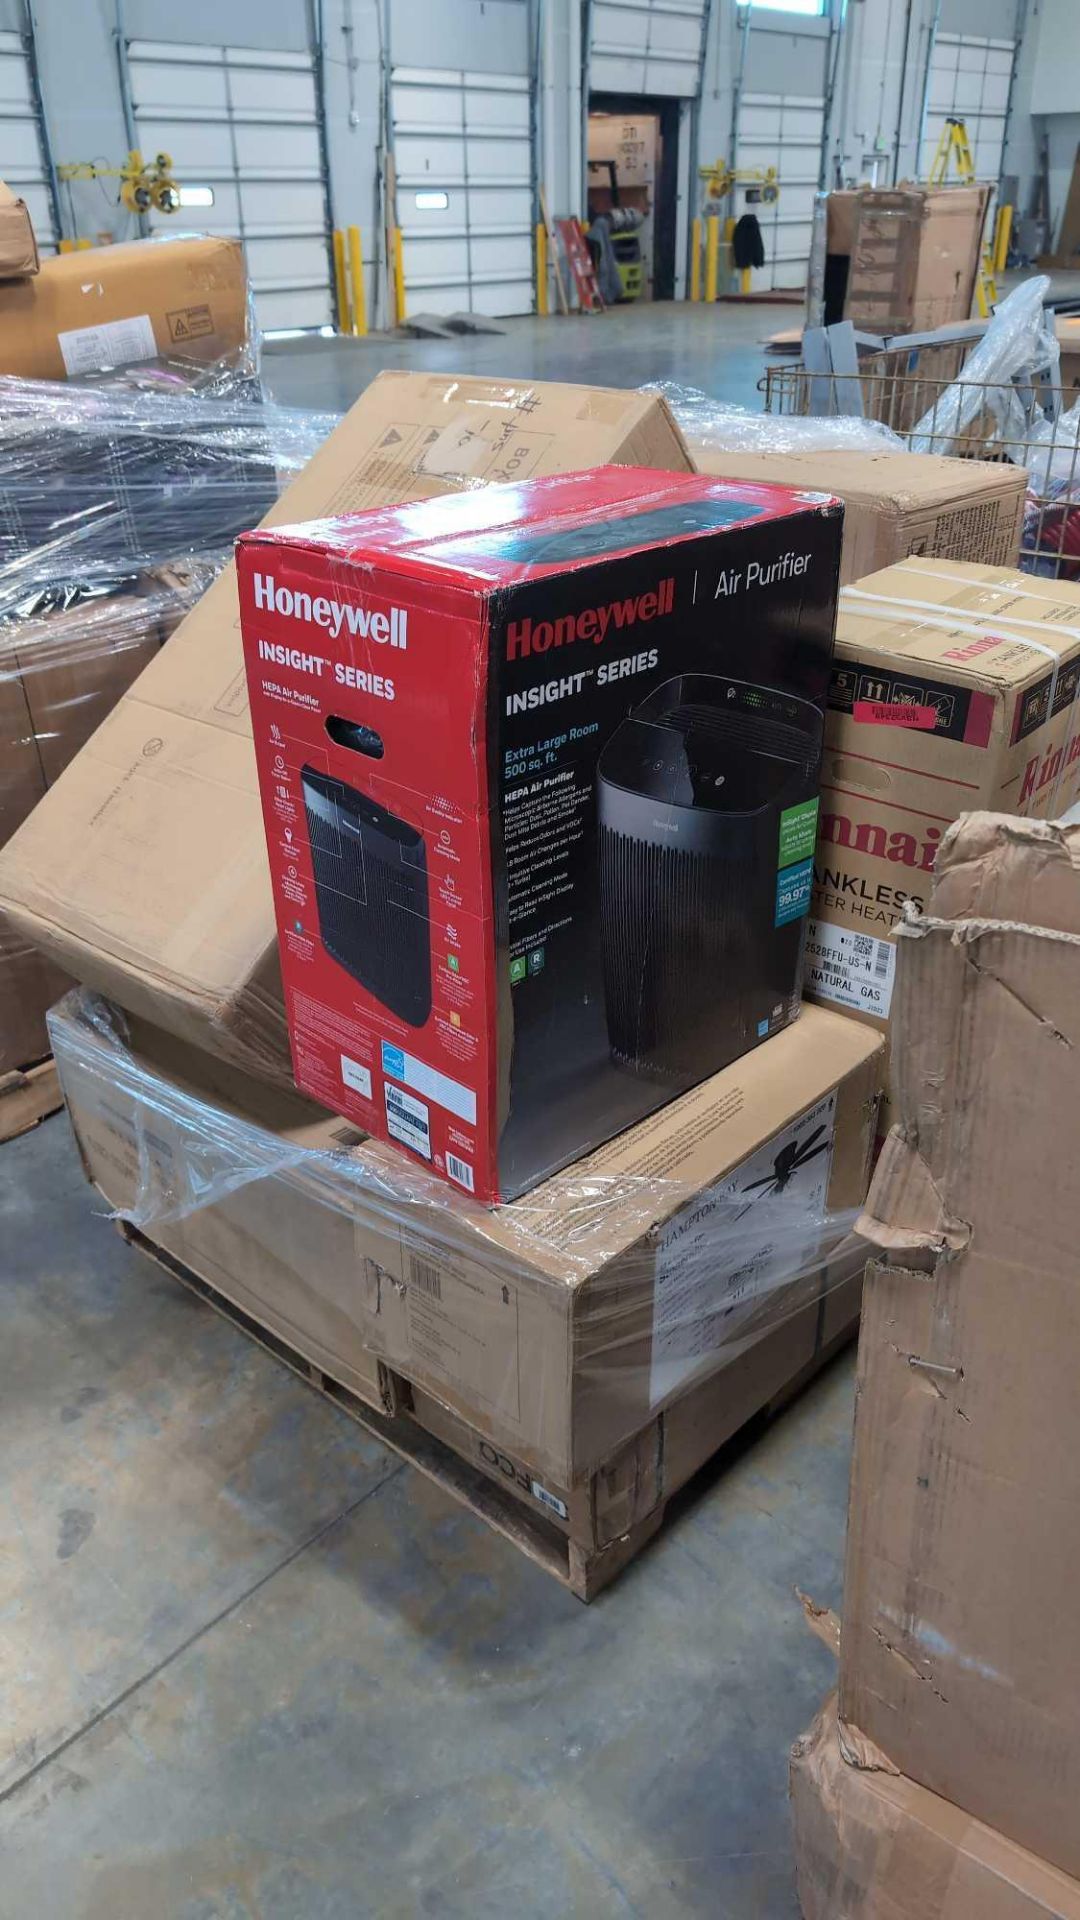 Honeywell Air purifer, Ceiling Fan, rinnai tankless water heater V75i, Pet fence pen, foam mats and - Image 4 of 13